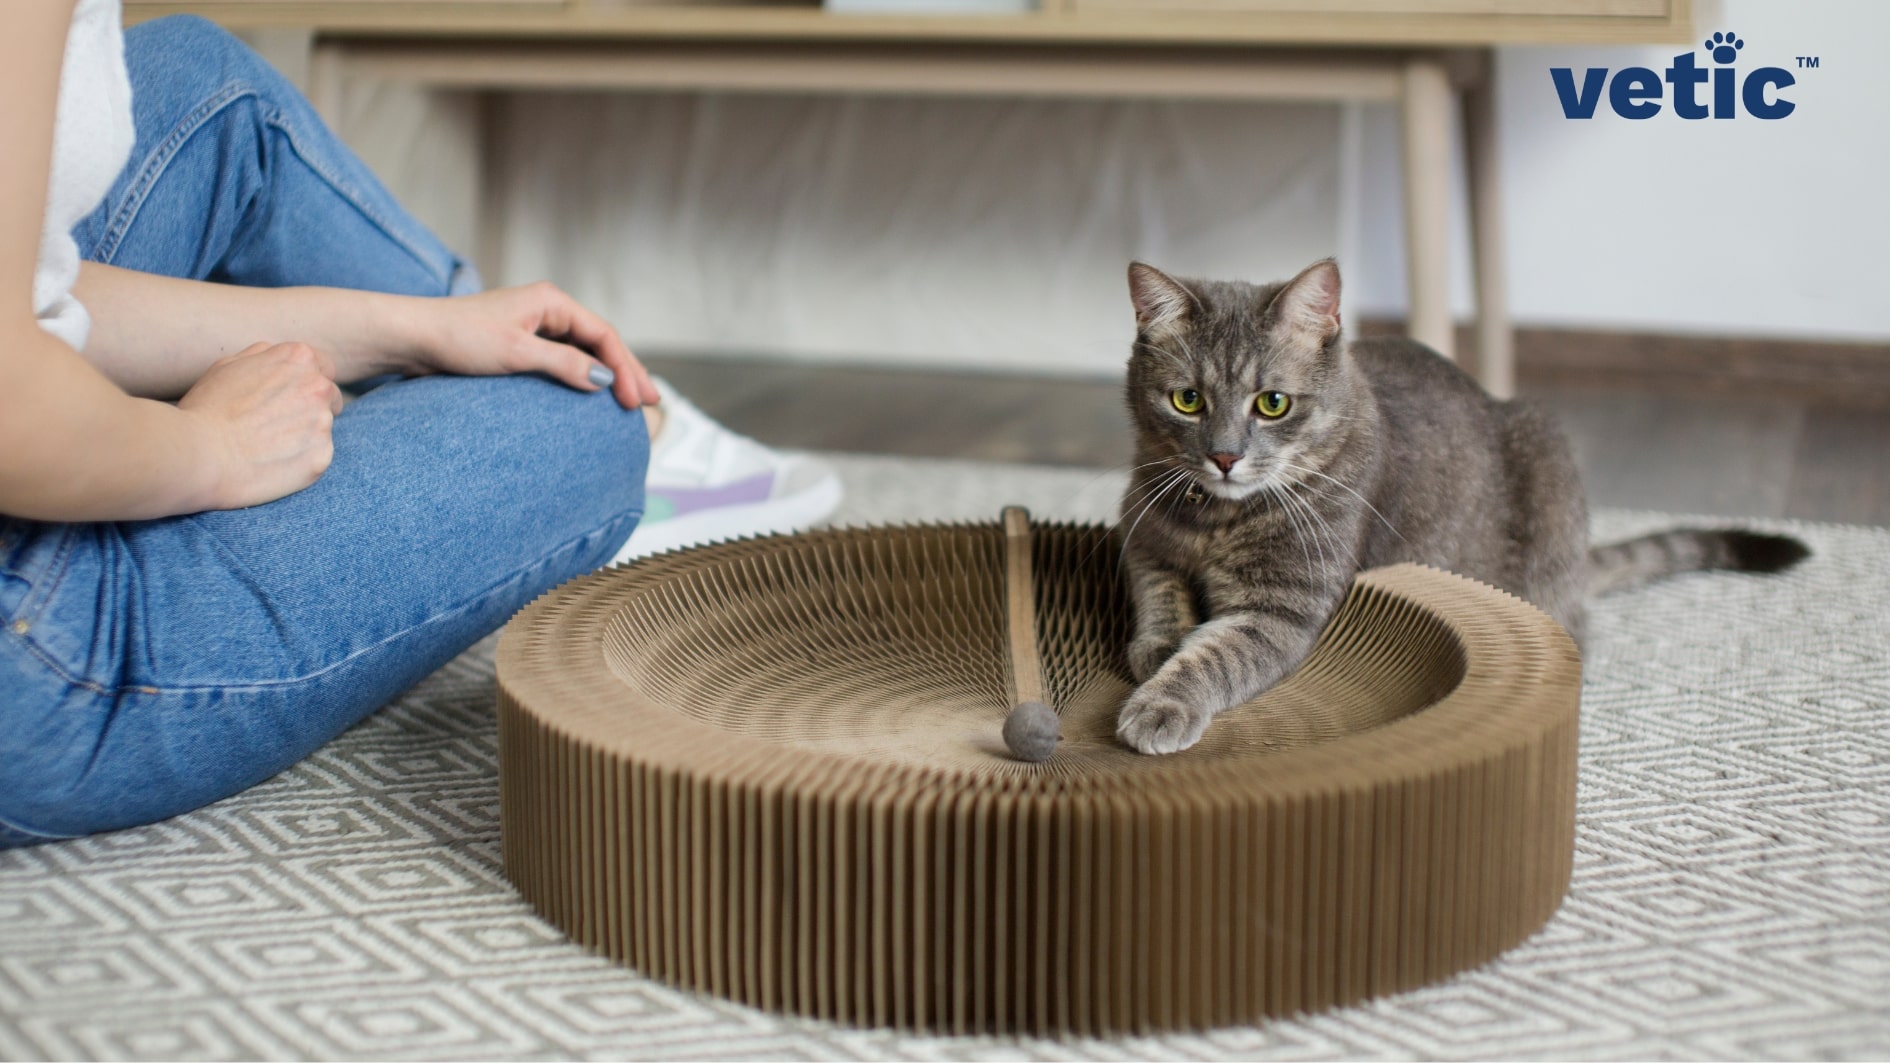 Ticked cat sitting beside a human wearing blue jeans. The cat is sitting with his paws placed on the cat scratcher.